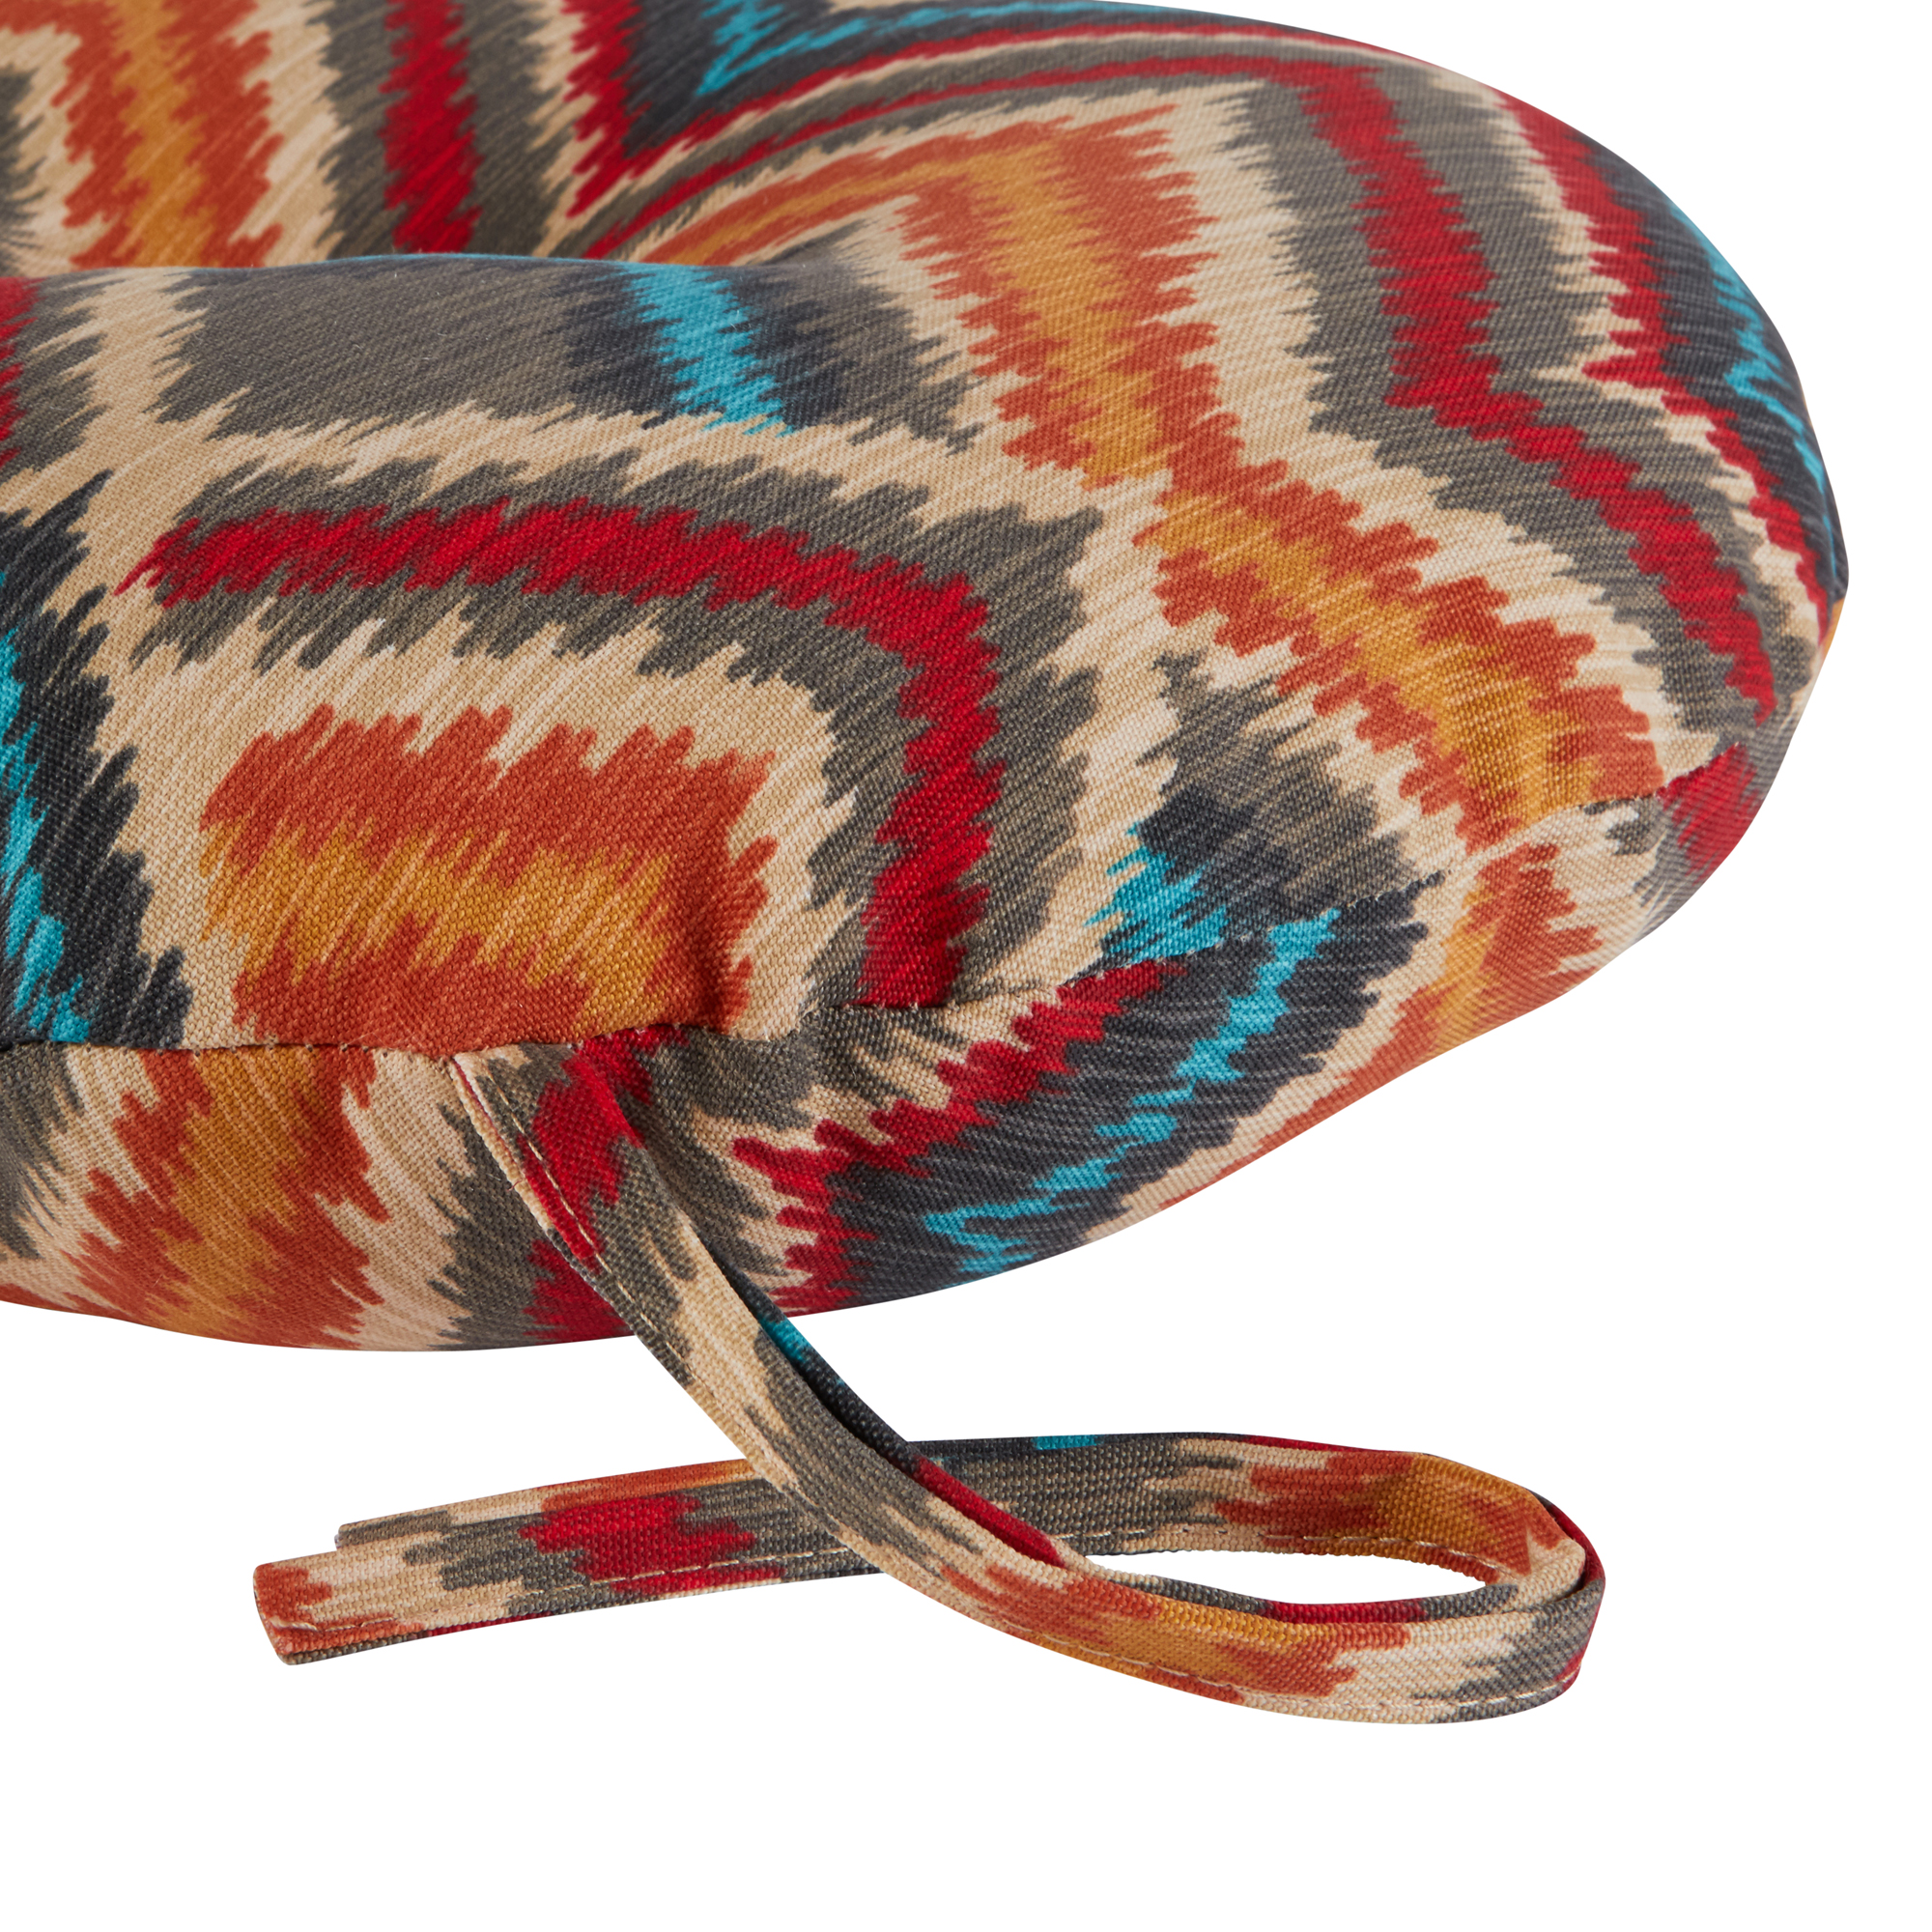 Greendale Home Fashions Surreal Chevron 15 in. Round Outdoor Reversible Bistro Seat Cushion (Set of 2) - image 4 of 7